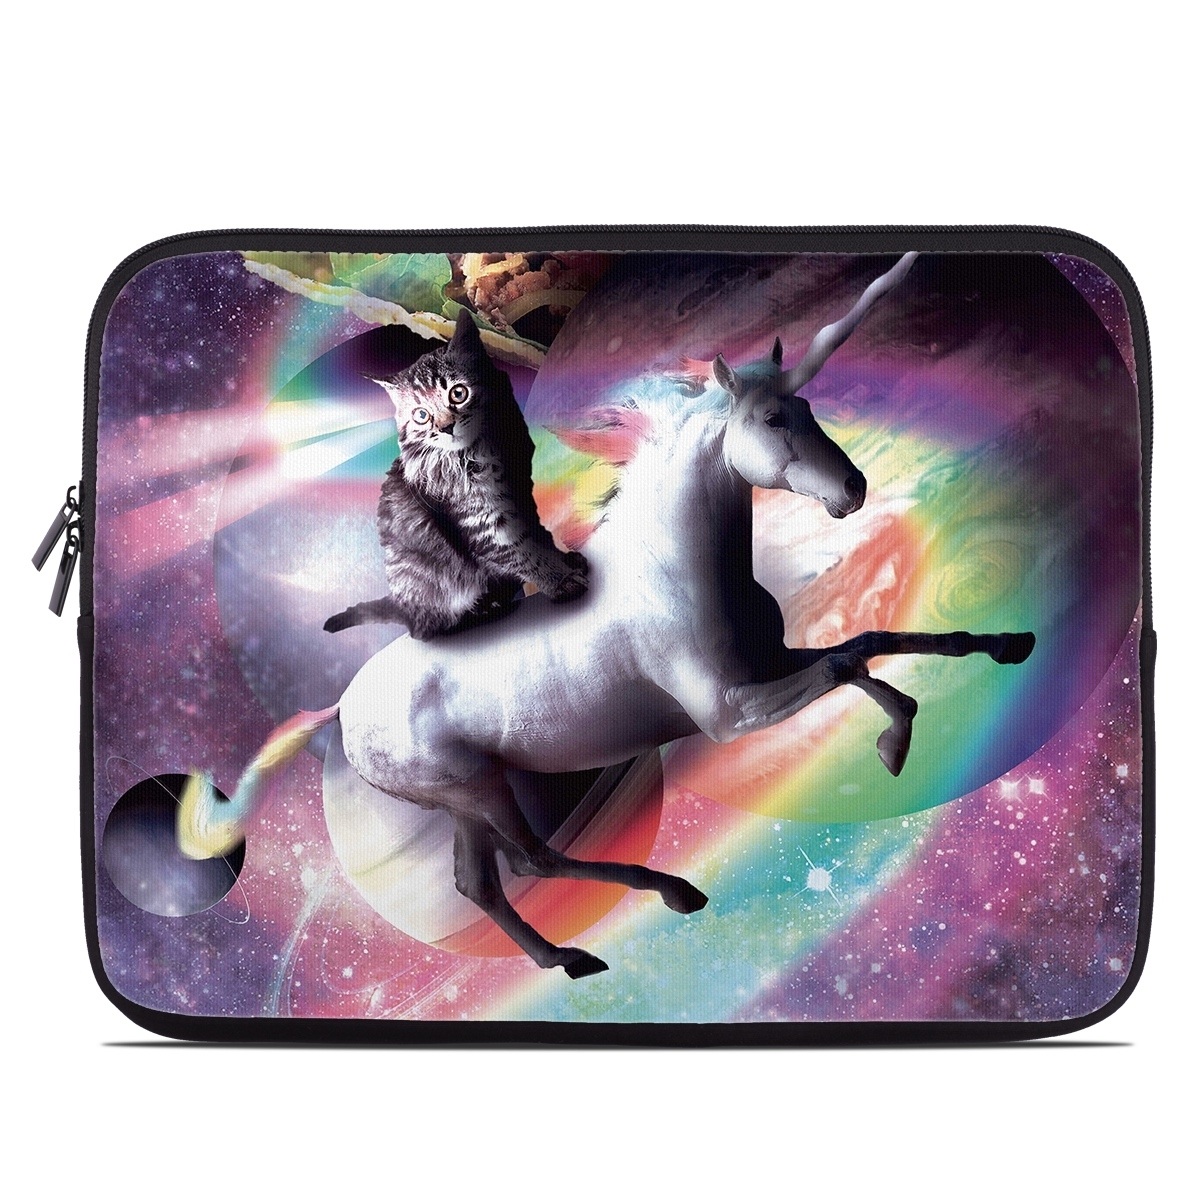 Laptop Sleeve - Defender of the Universe (Image 1)